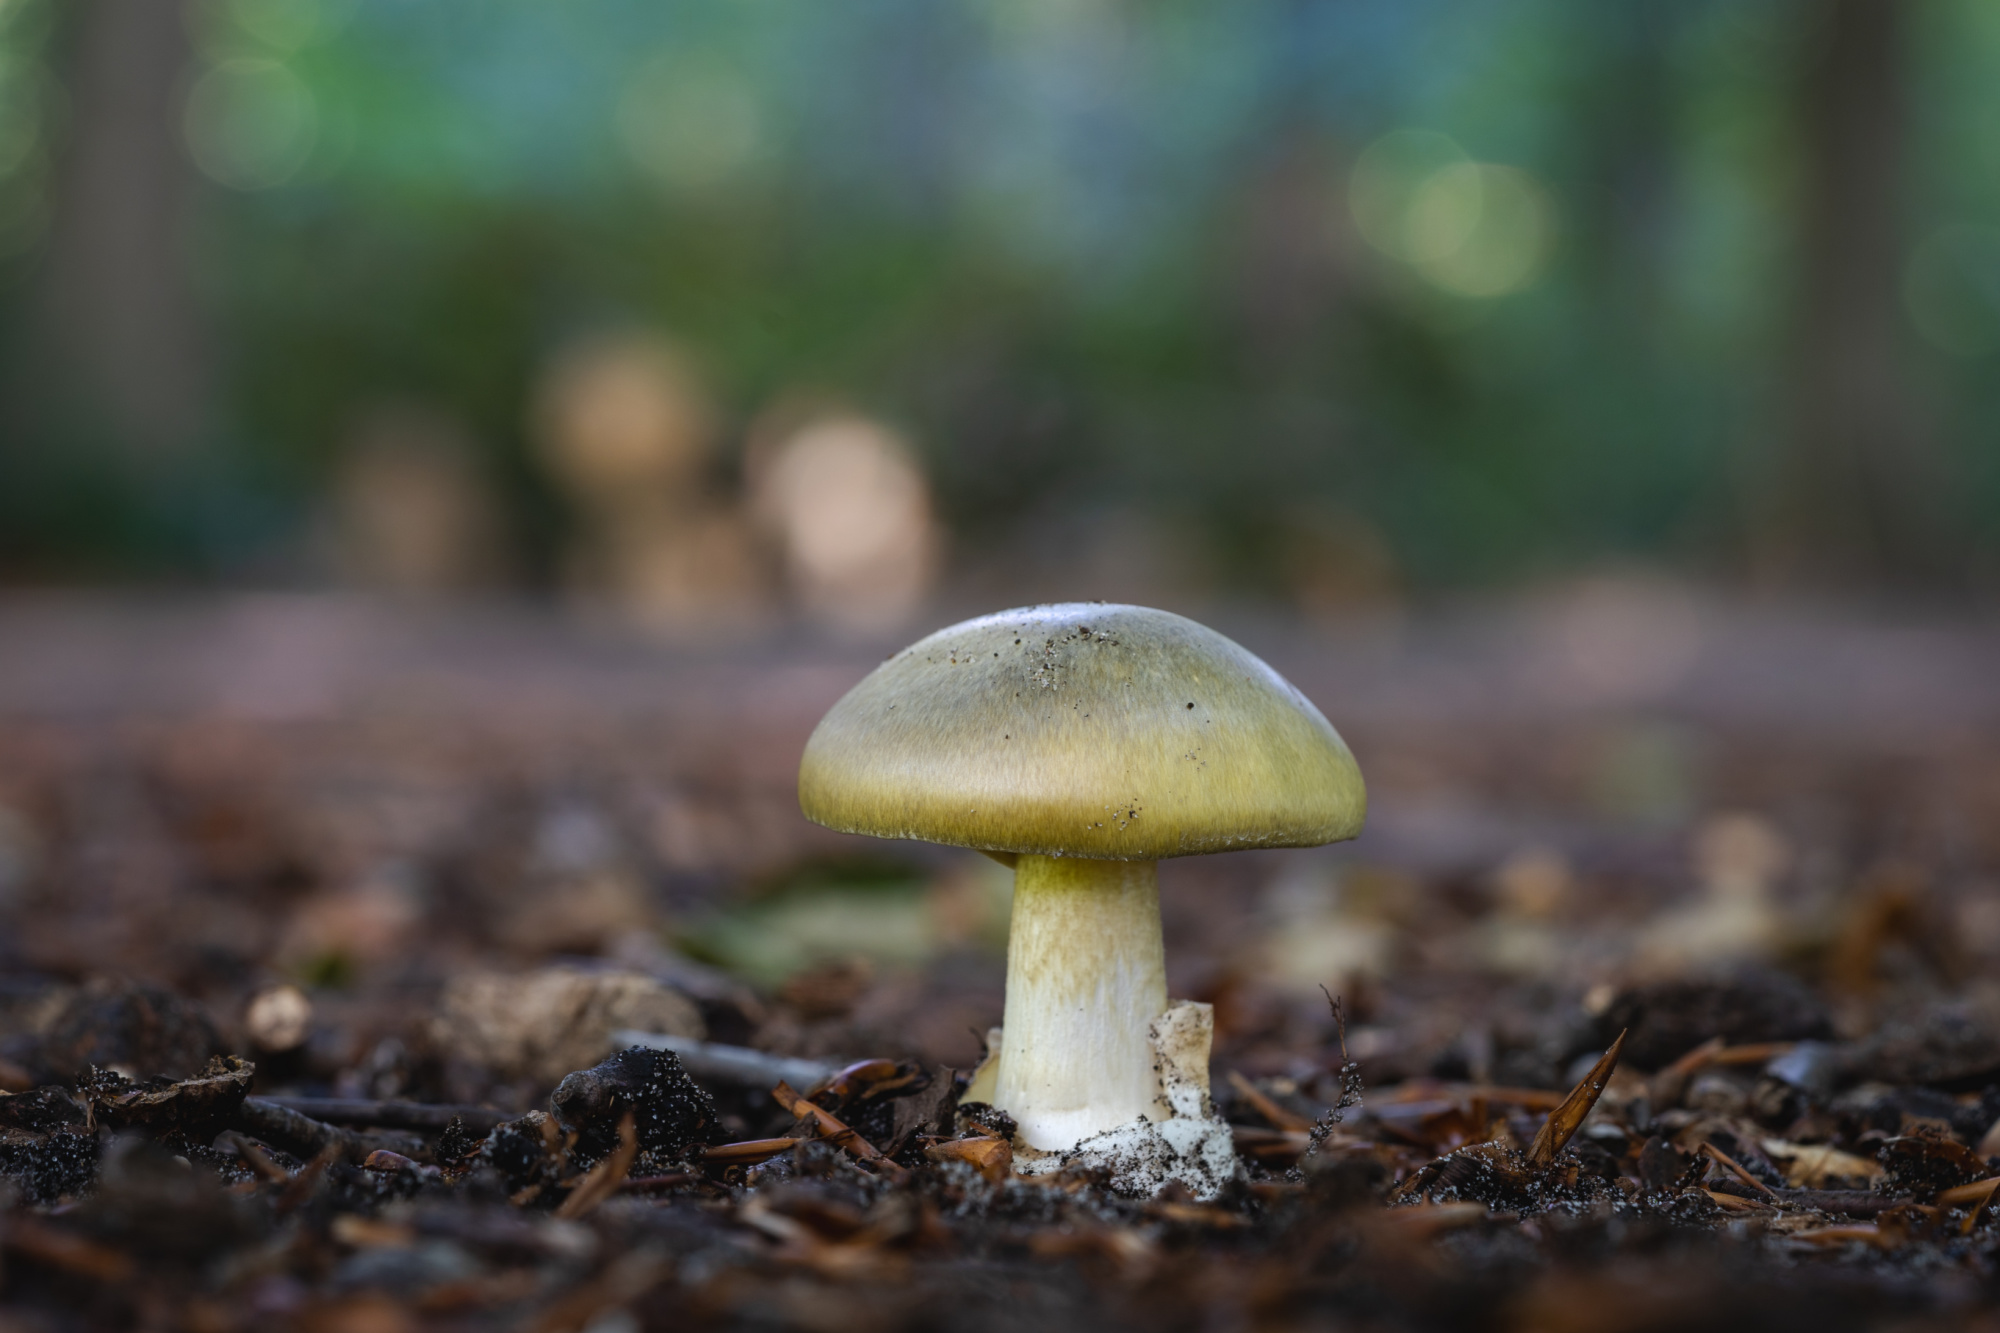 5 Poisonous Mushrooms You Should Learn to Identify